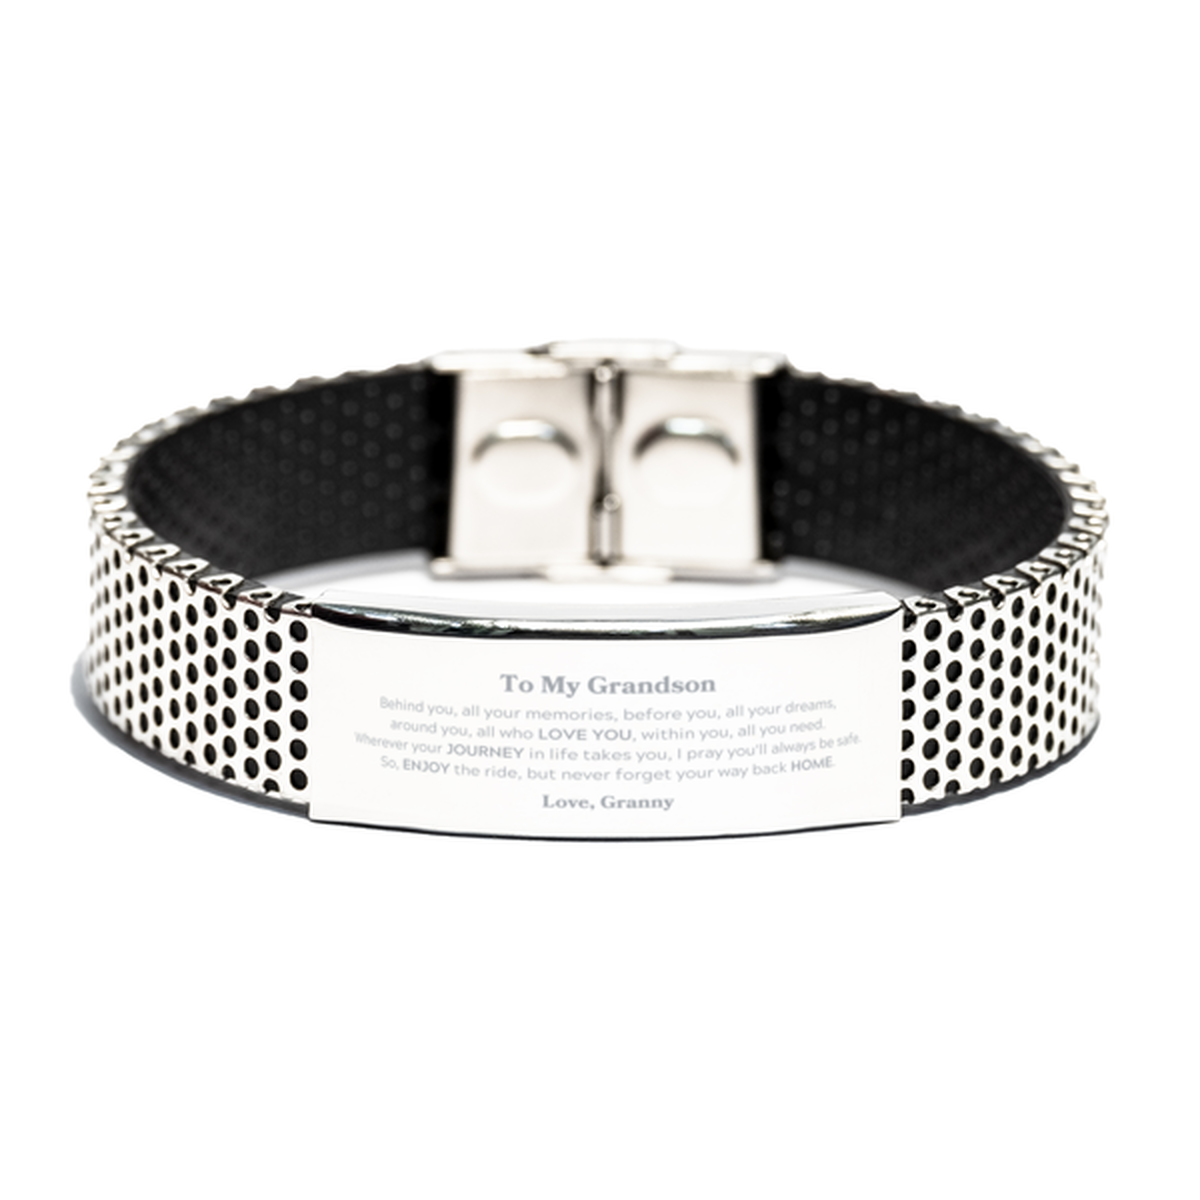 To My Grandson Graduation Gifts from Granny, Grandson Stainless Steel Bracelet Christmas Birthday Gifts for Grandson Behind you, all your memories, before you, all your dreams. Love, Granny